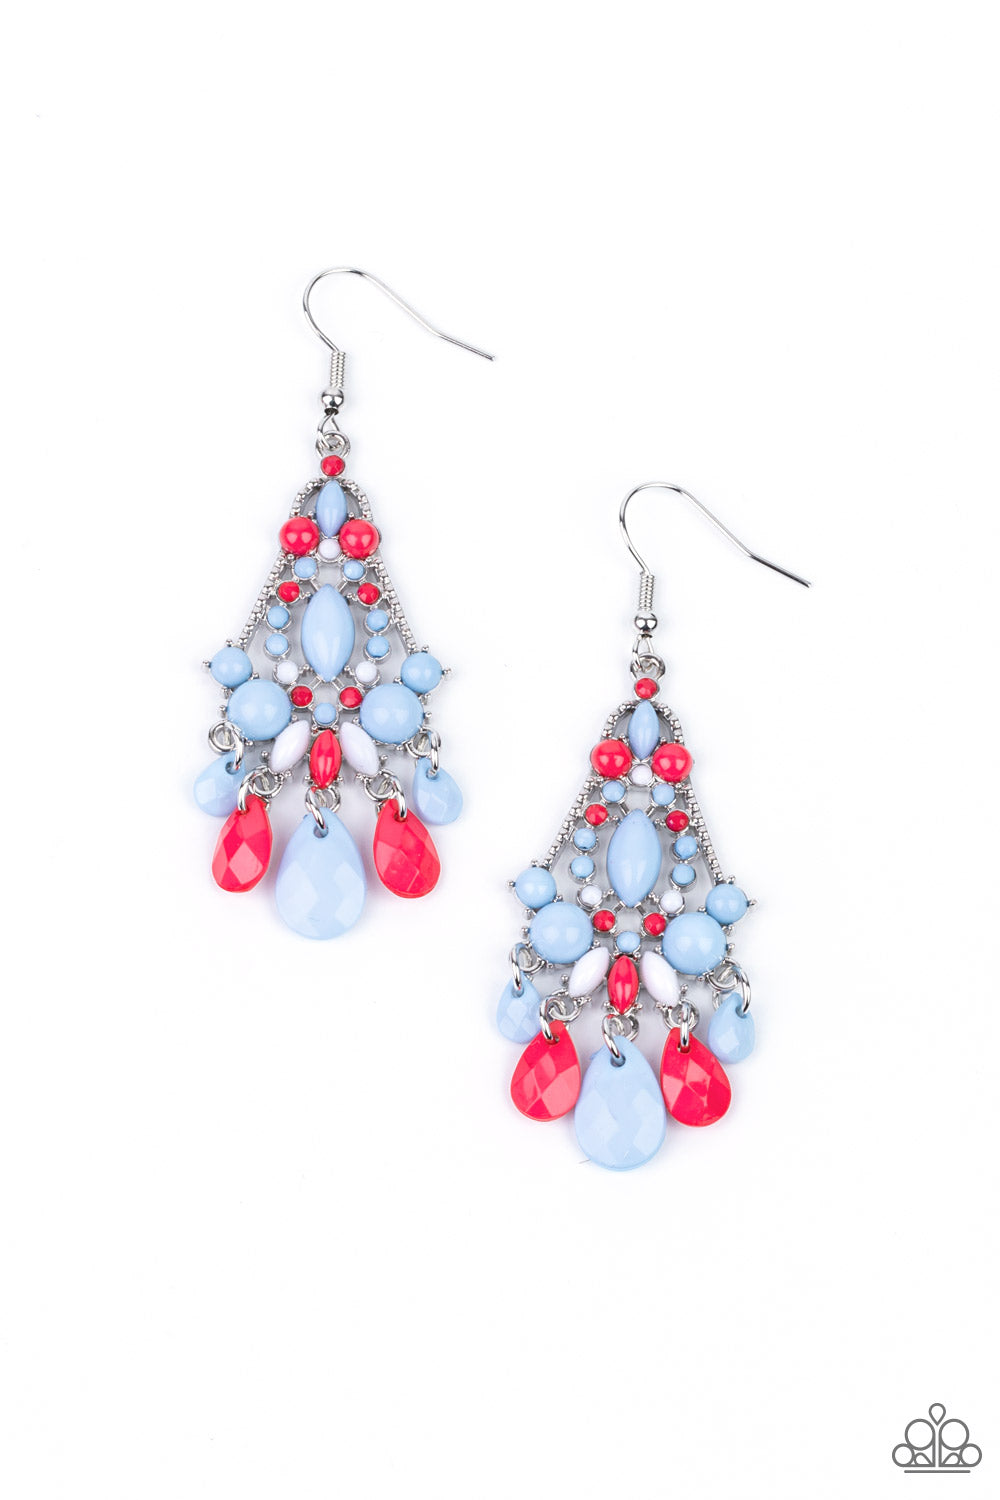 Paparazzi Accessories STAYCATION Home - Multi Earrings  an array of bubbly Cerulean, white, and Raspberry Sorbet beads decoratively adorn the front of a studded silver frame. Faceted teardrops drip from the bottom of the colorful frame, creating a whimsical fringe. Earring attaches to a standard fishhook fitting.  Sold as one pair of earrings.